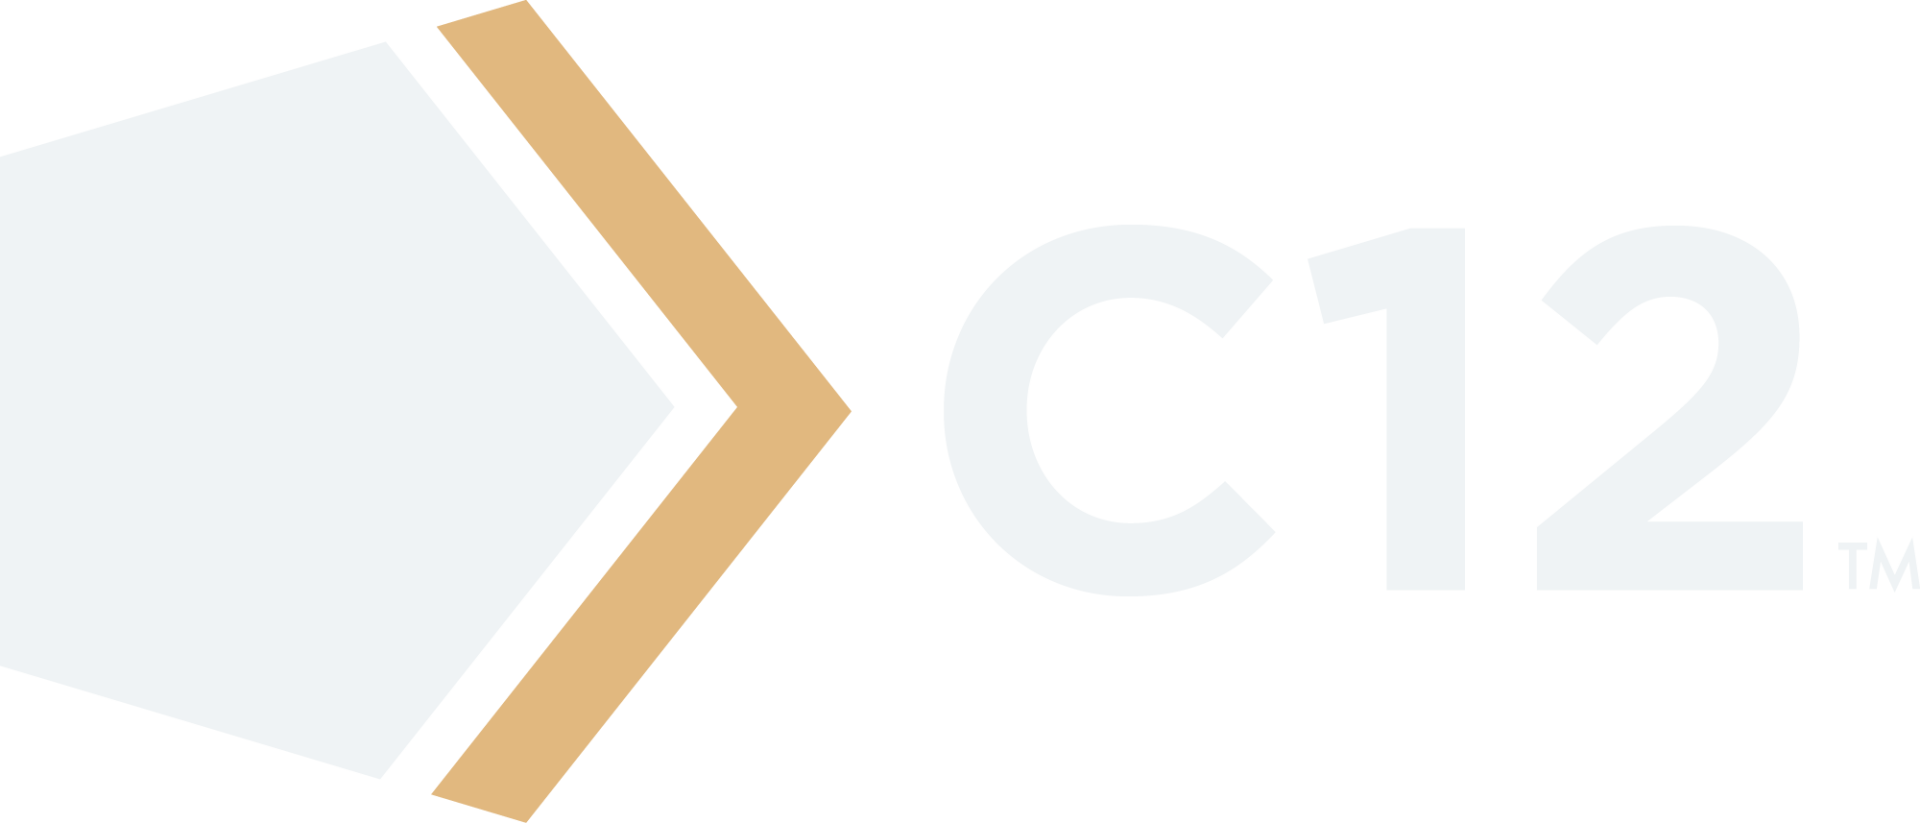 a logo for a company called C12 with an arrow pointing to the right .